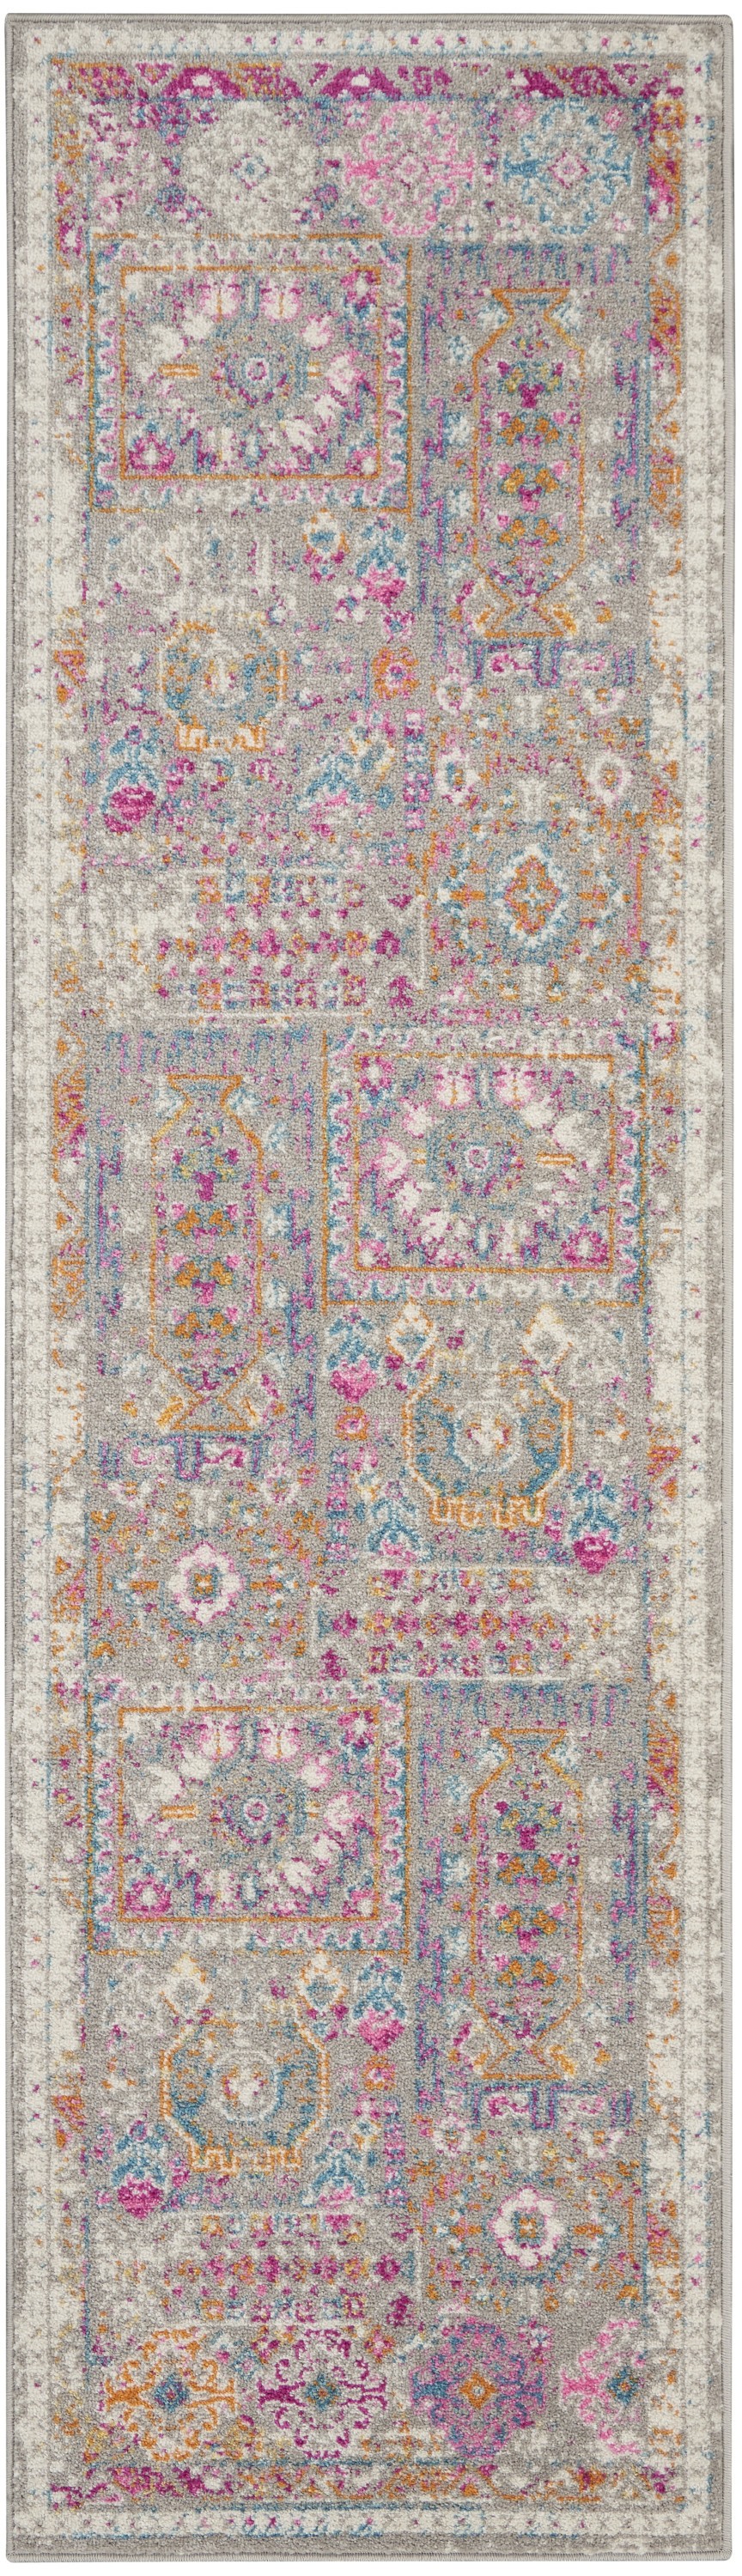 10' Pink And Gray Abstract Power Loom Runner Rug-385721-1